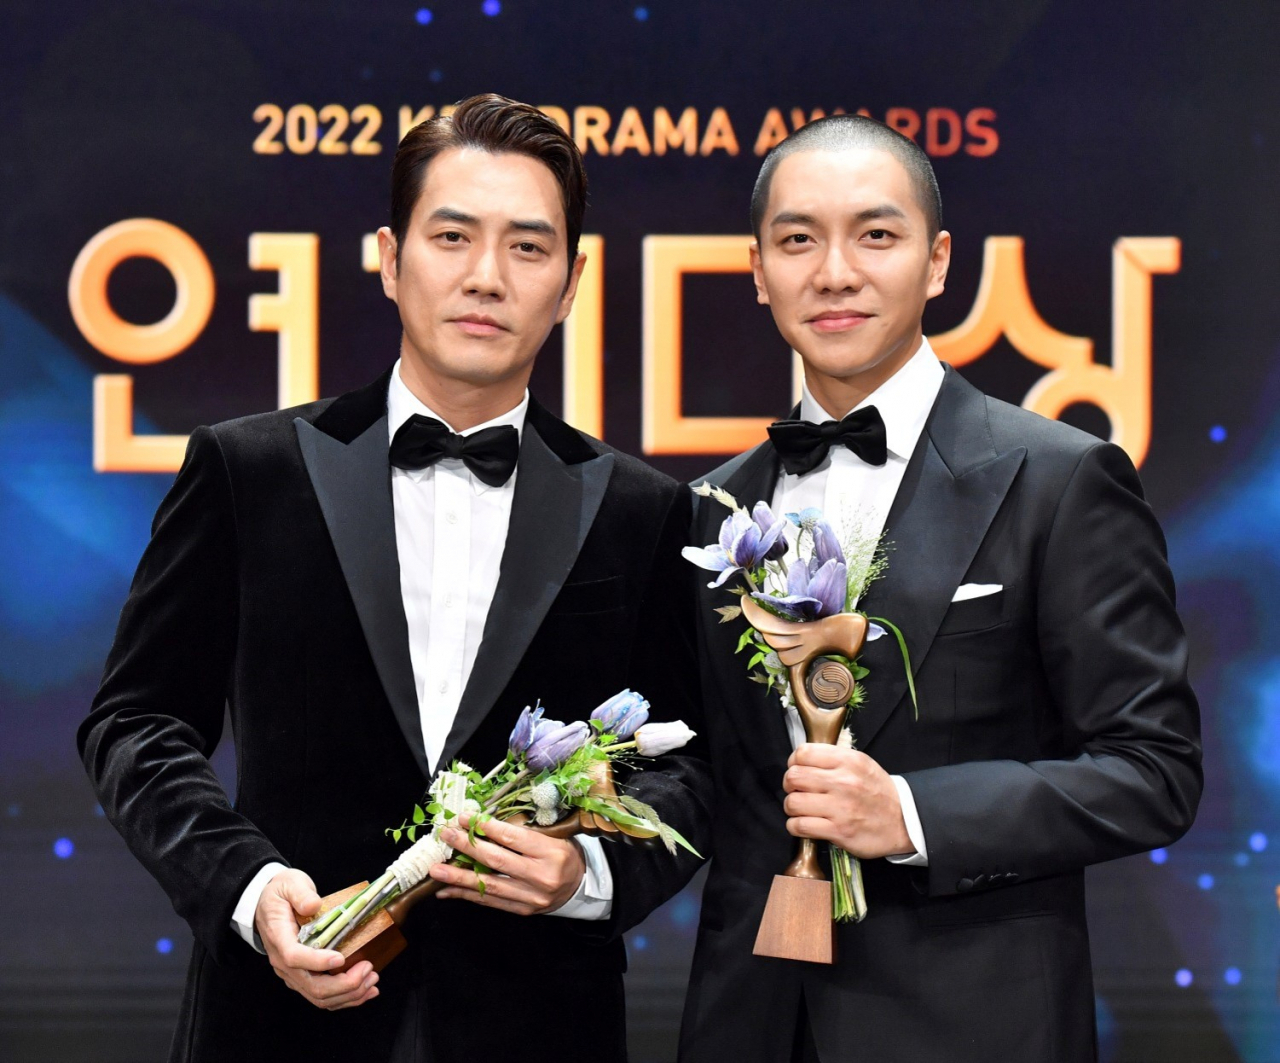 Joo Sang-uk (left) and Lee Seung-gi pose for photos after winning the grand prize at 2022 KBS Drama Awards at KBS Annex Hall in Yeongdeungpo-gu, Seoul, Dec. 31. (KBS)